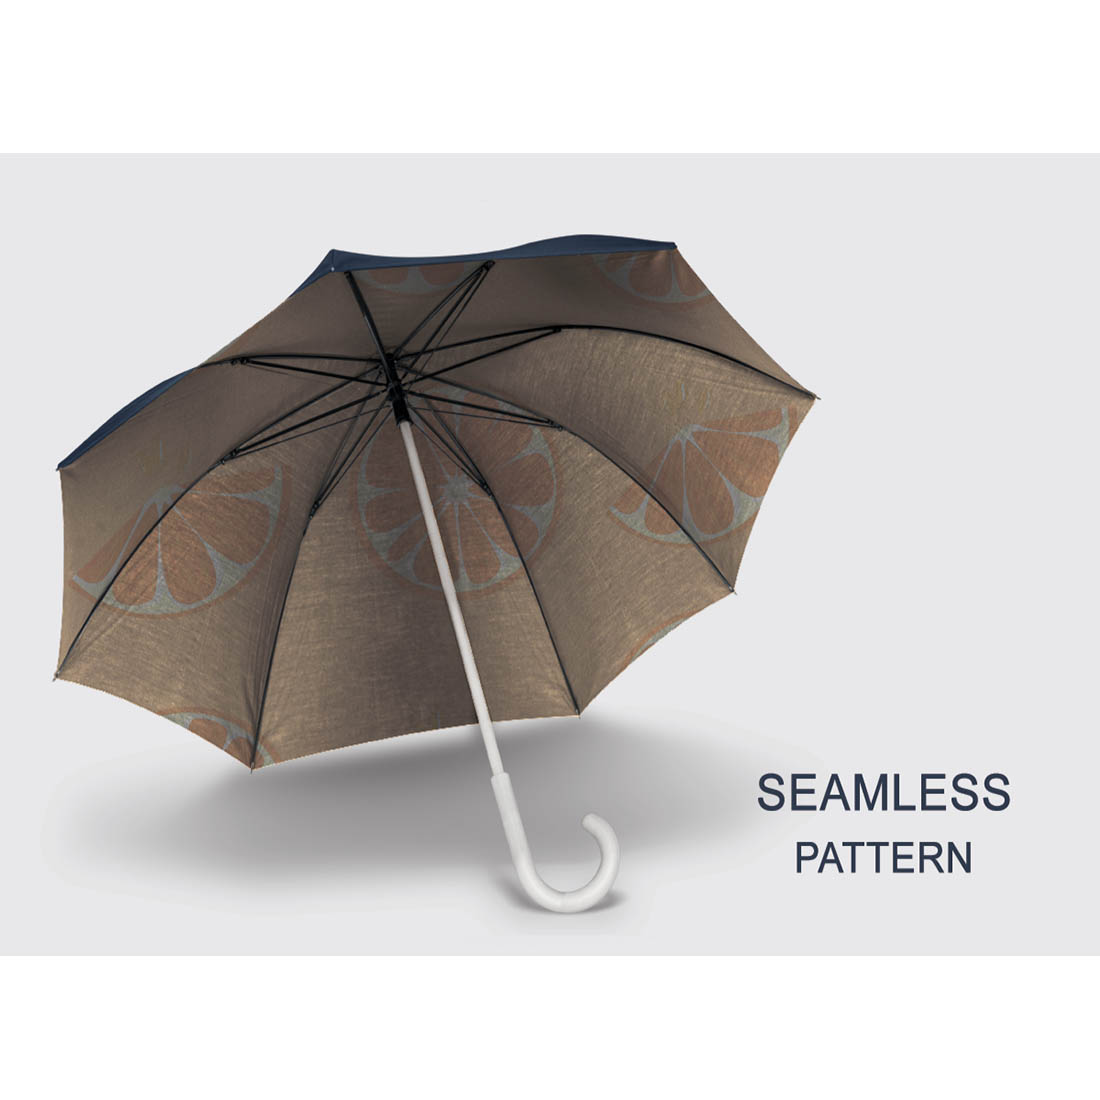 Picture of an umbrella with a gorgeous orange pattern